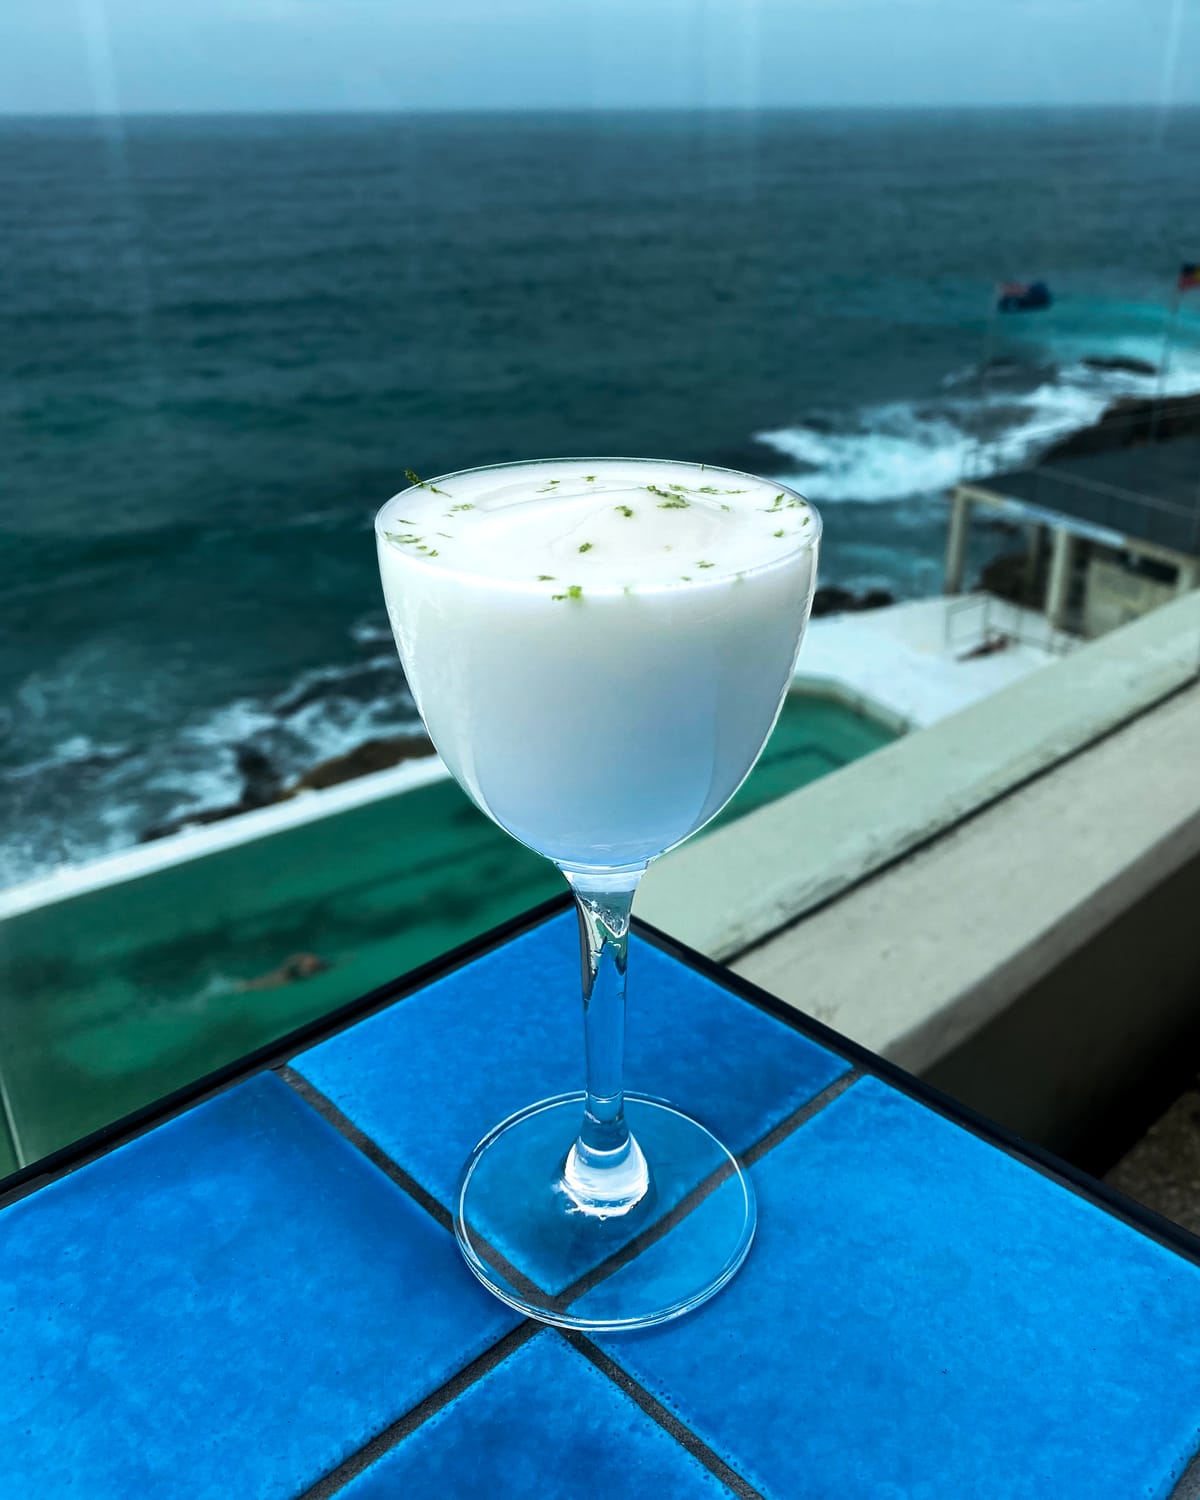 The Icebergs Sgroppino is a drink we love